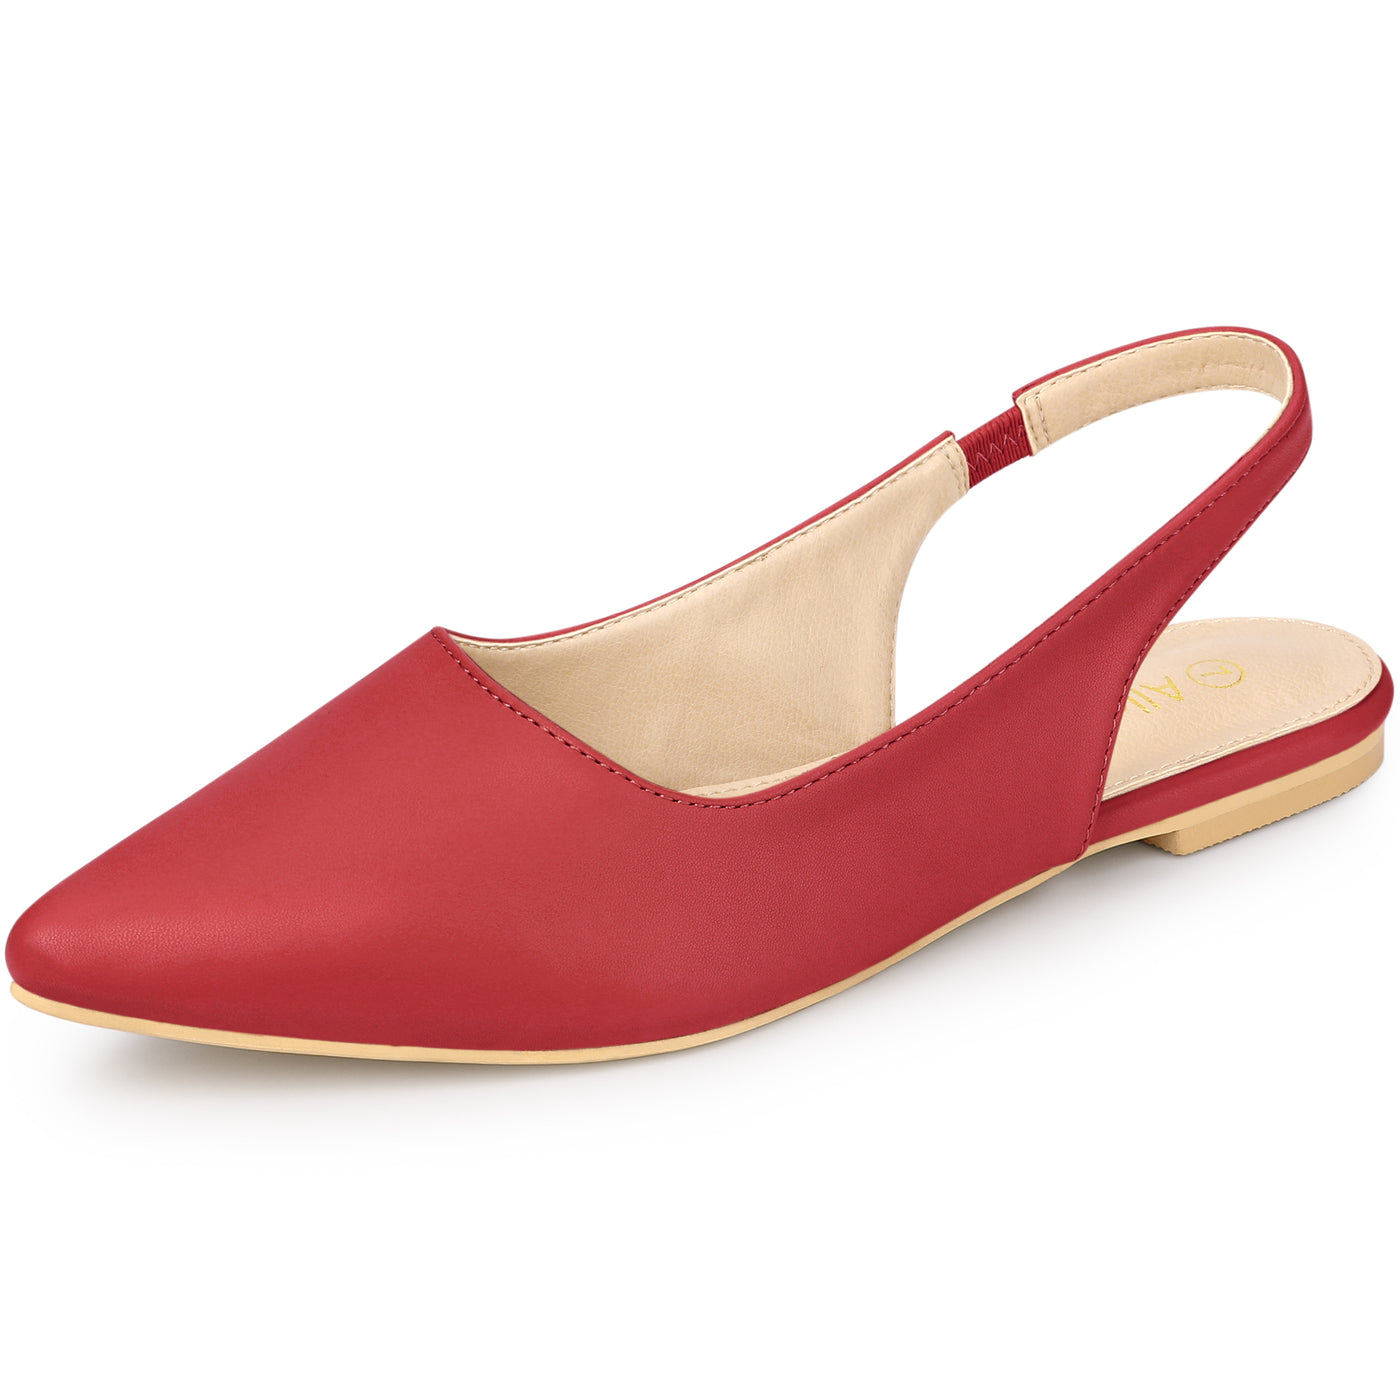 Allegra K Faux Leather Pointed Toe Slingback Slip On Flat Pumps